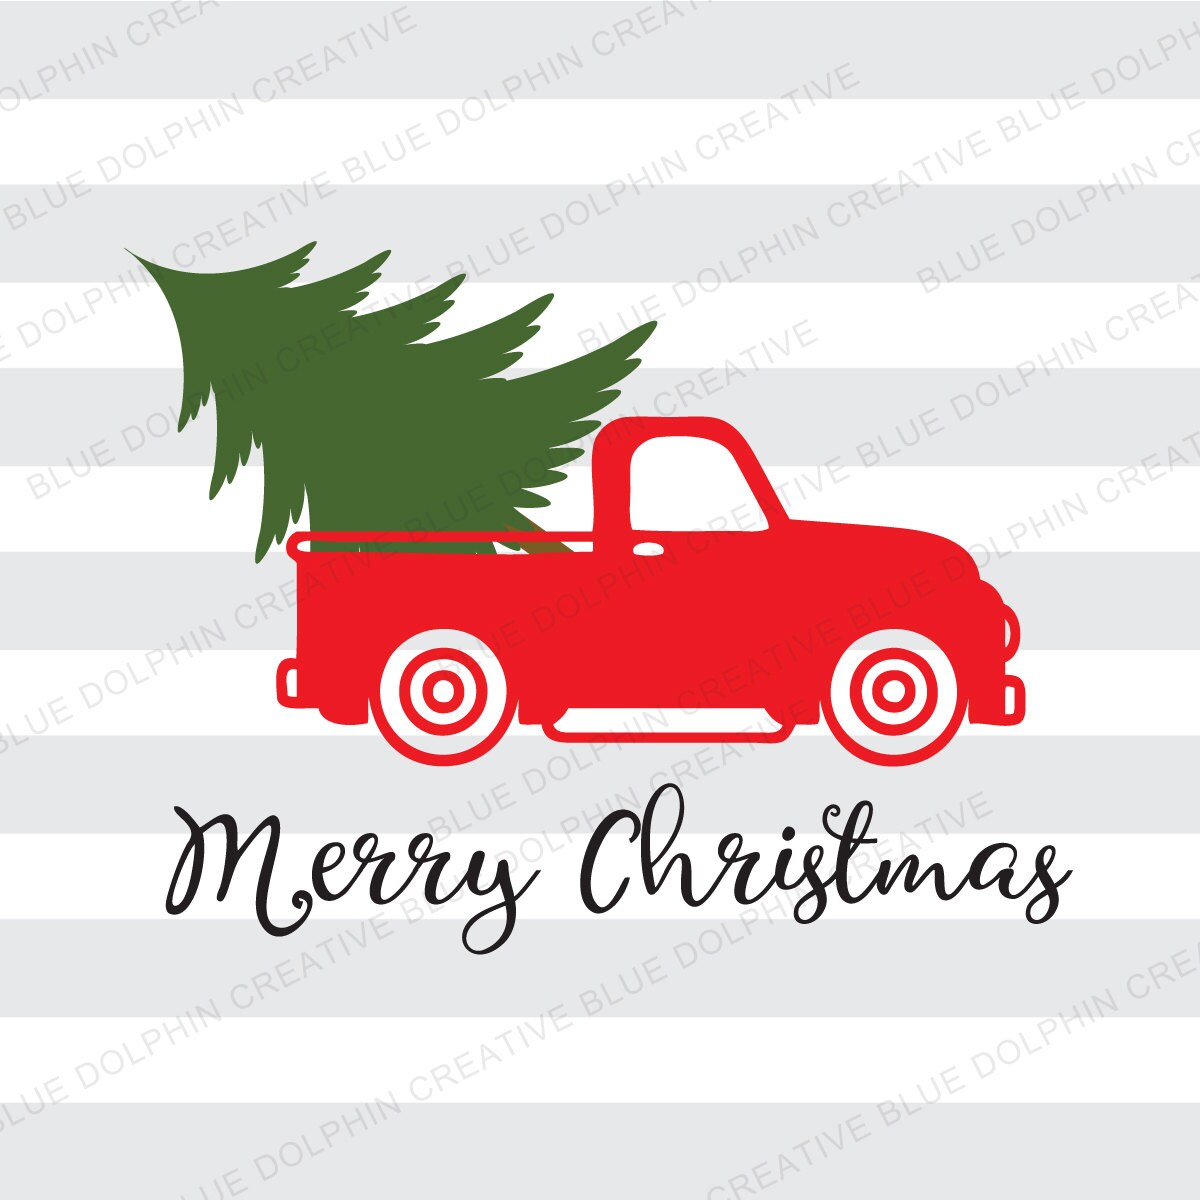 Vintage Truck Christmas tree delivery SVG dxf png pdf jpg ai